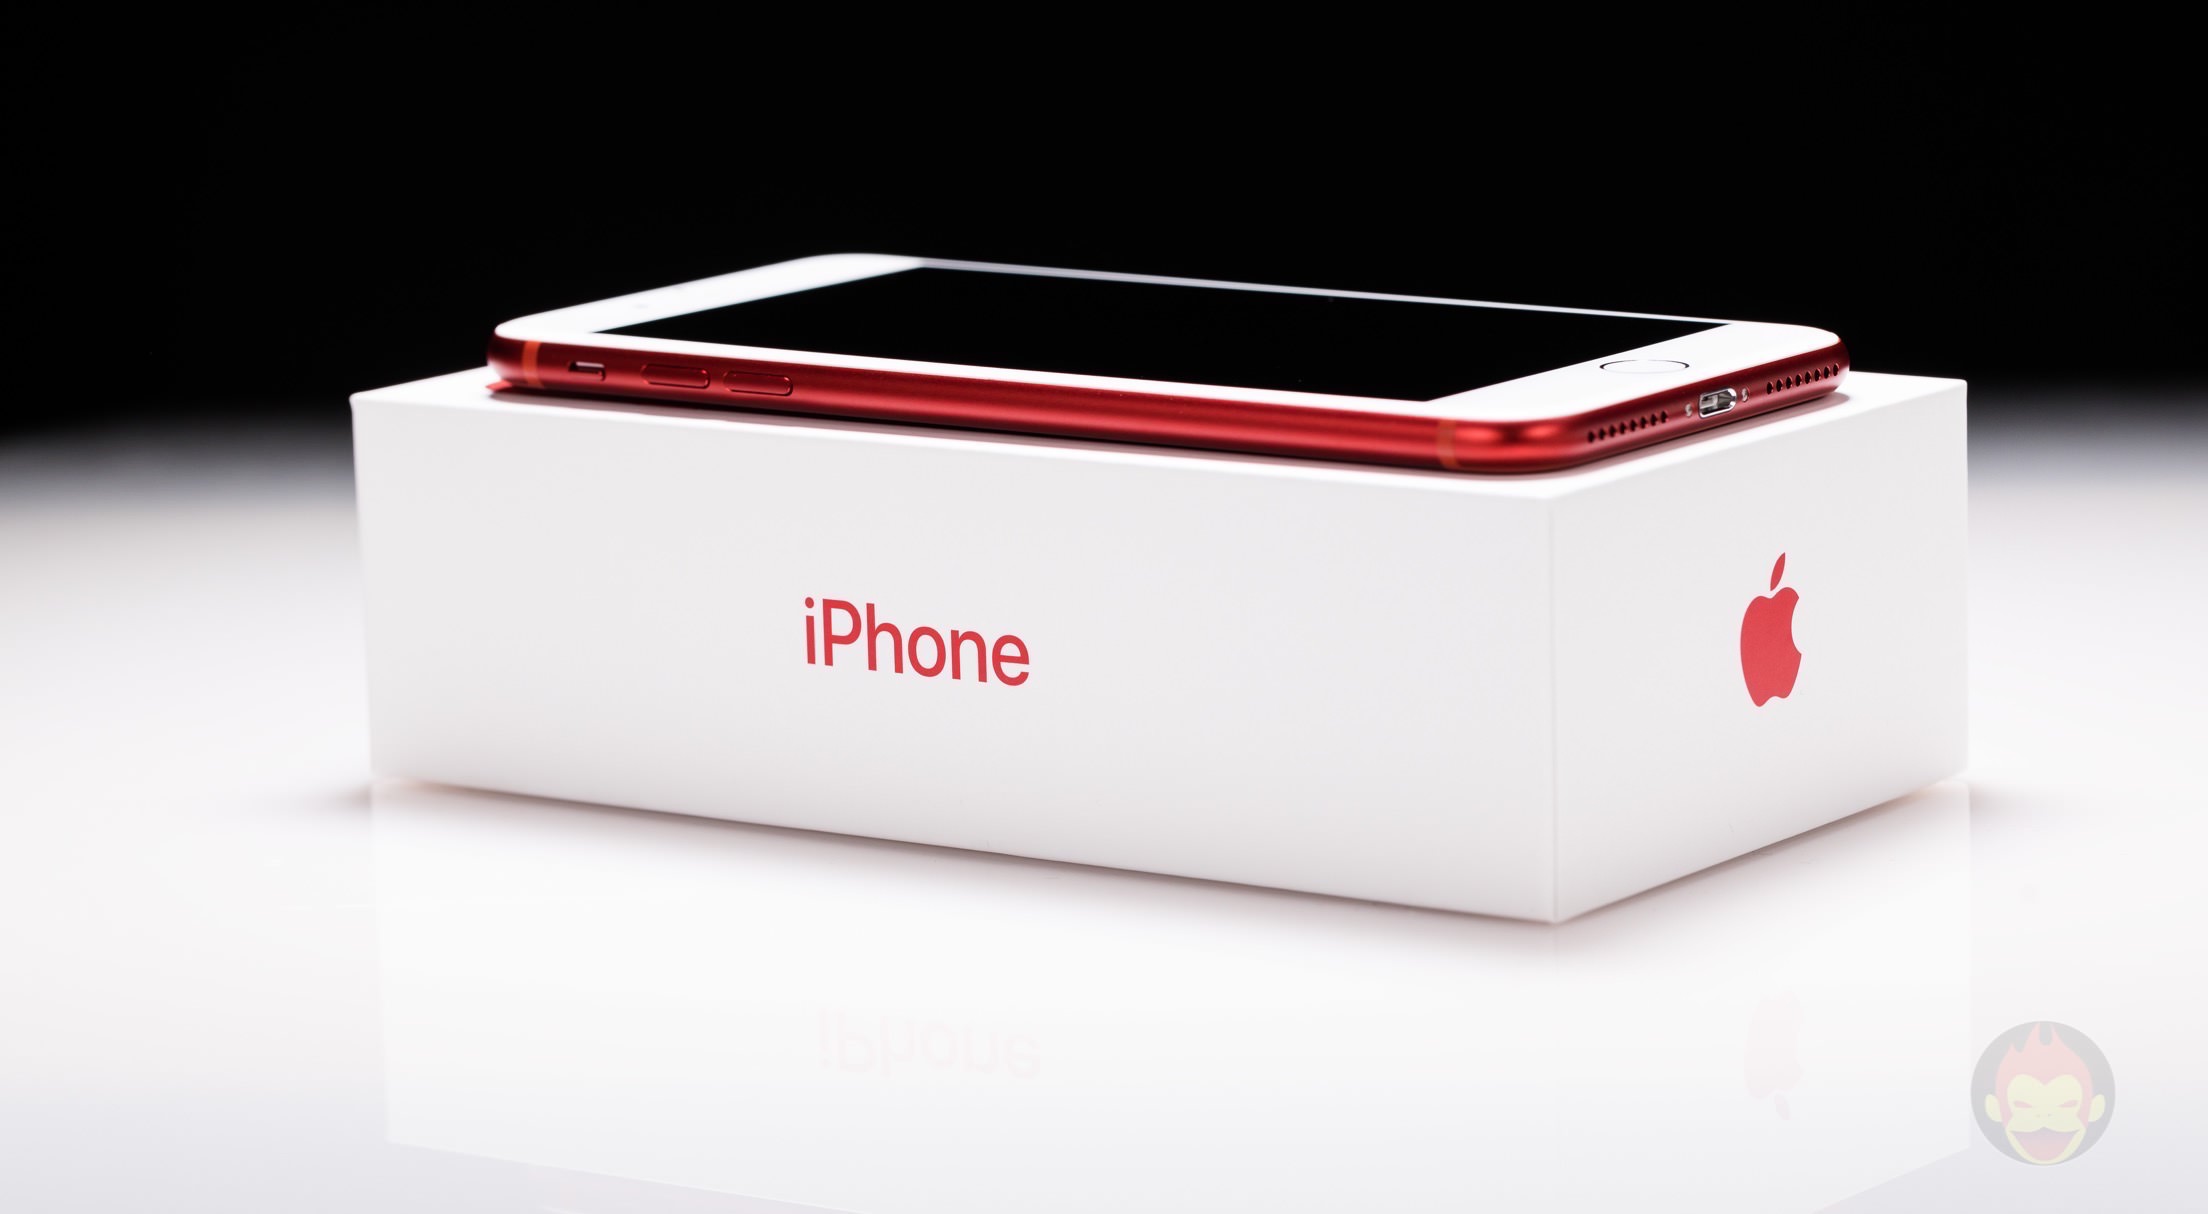 iPhone-7-Product-Red-Special-Edition-16.jpg